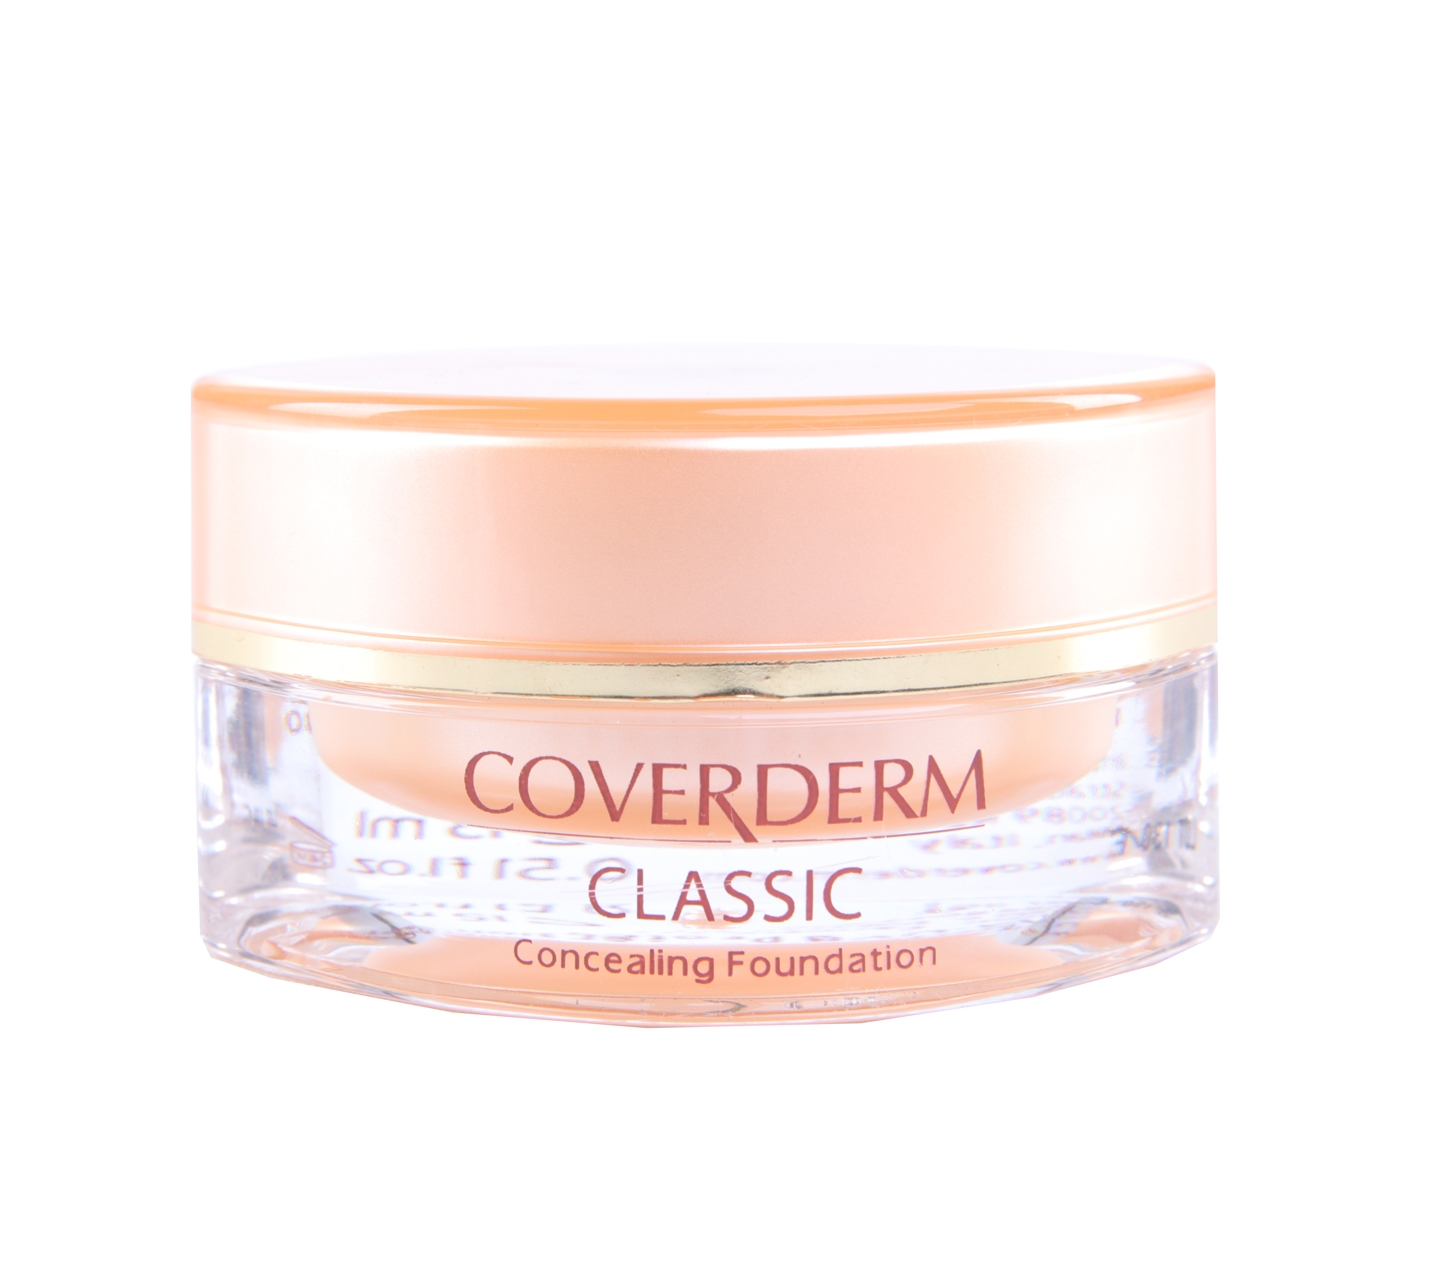 Coverderm Classic Concealing Foundation Faces